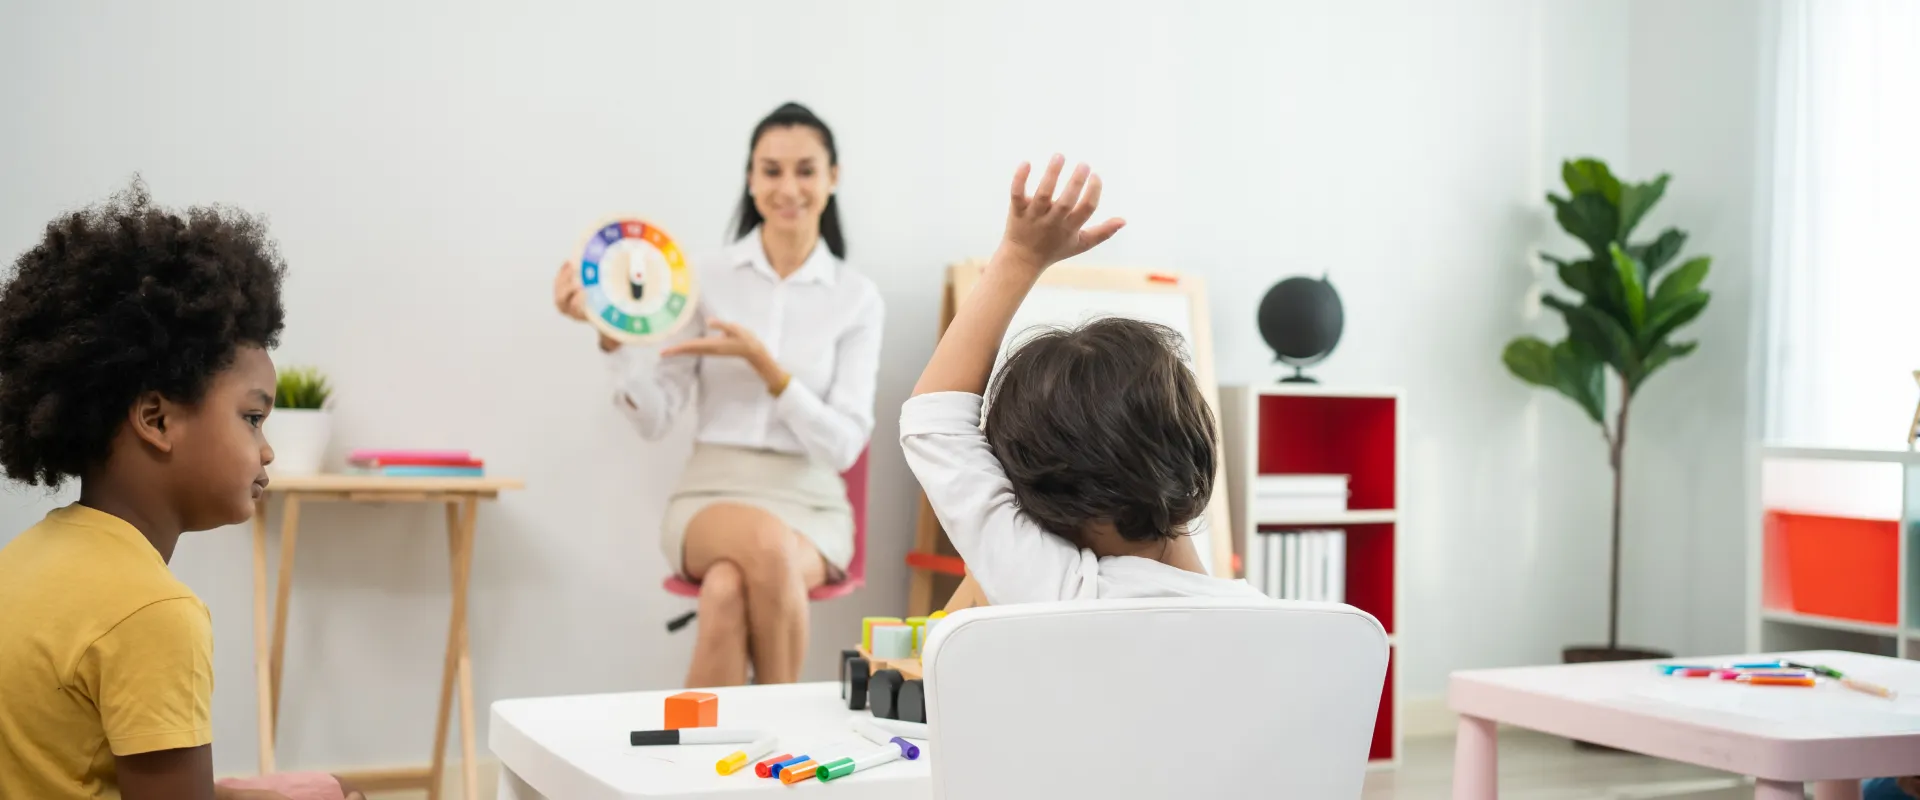 5 Reasons to Choose a Career in Early Childhood